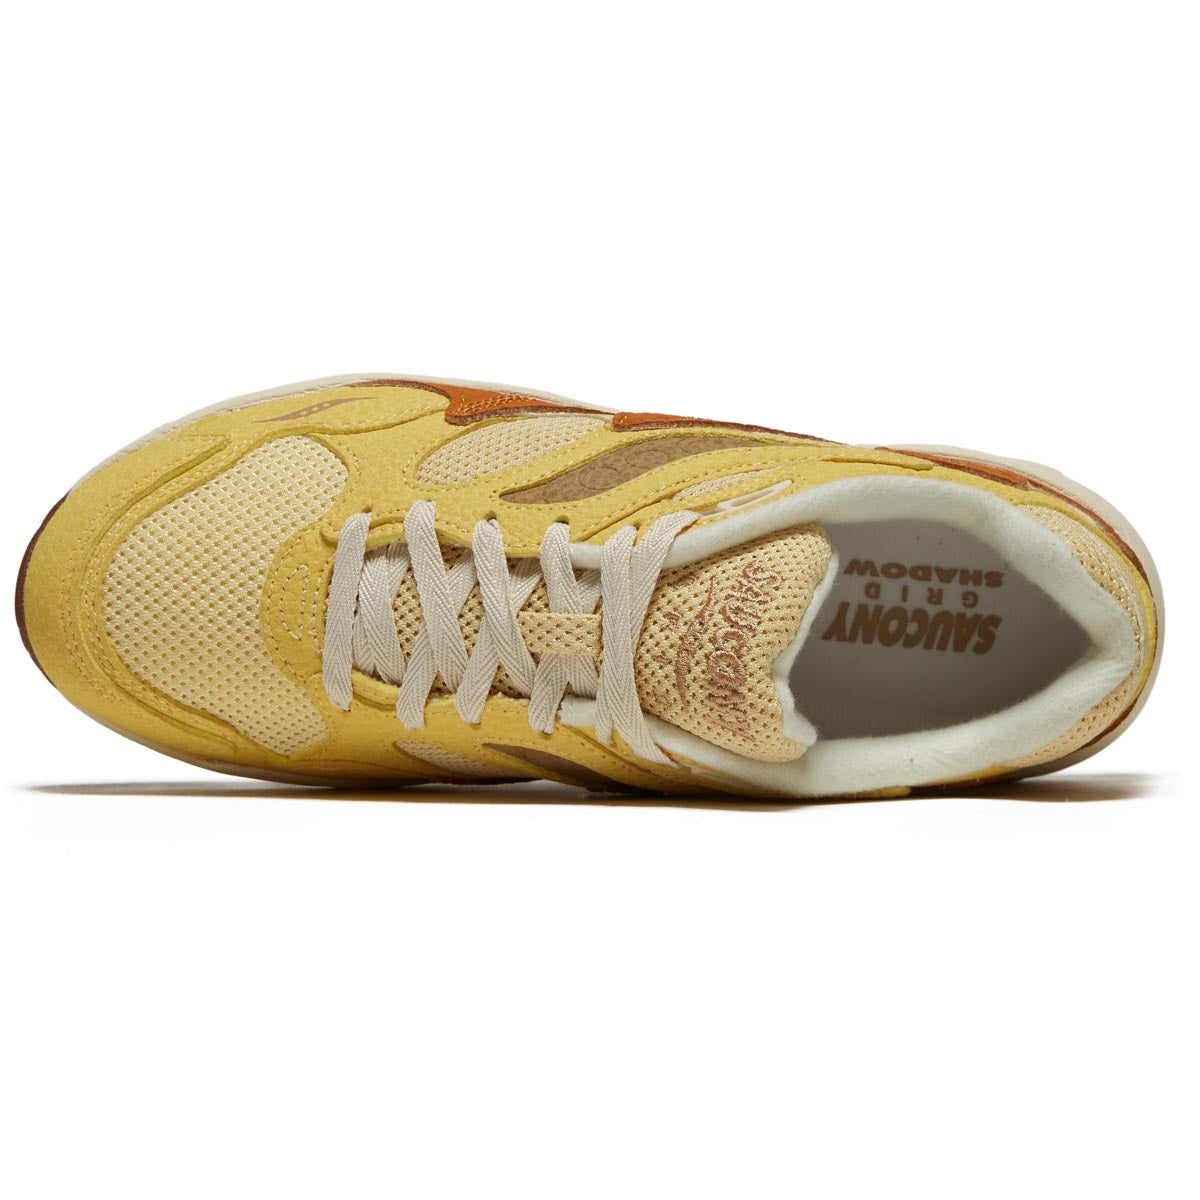 Saucony Grid Shadow 2 Shoes - Mustard/Tan image 3